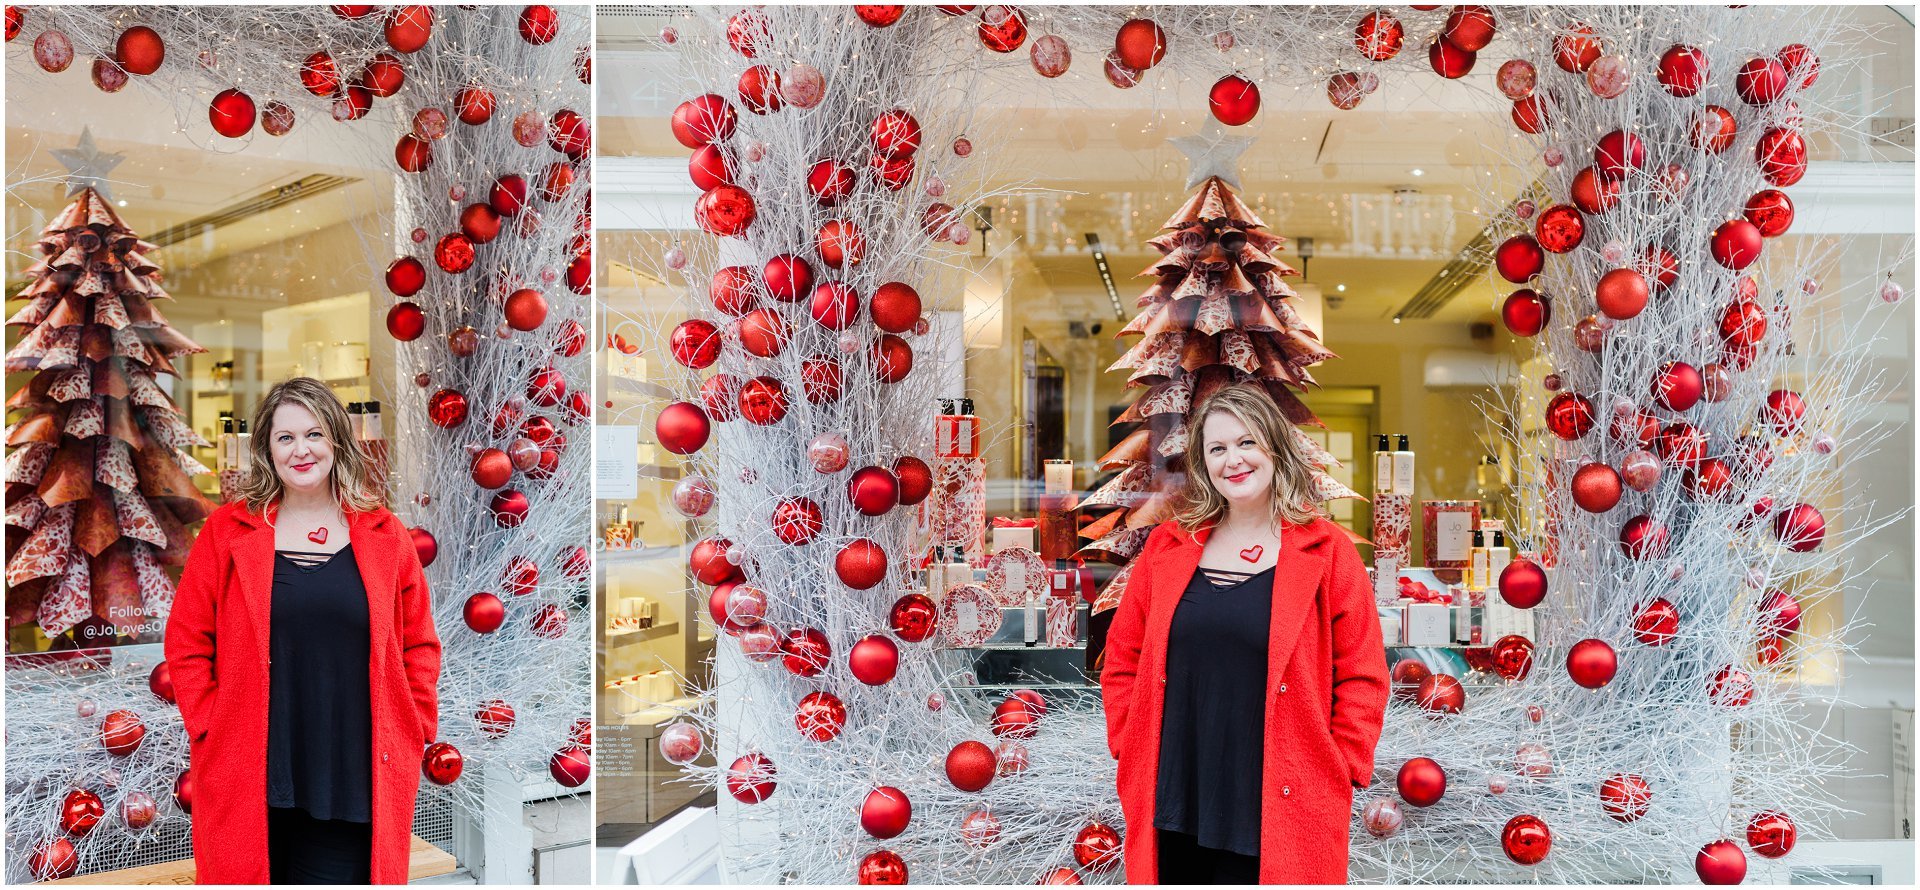 Christmas branding shoot in Belgravia with Claire Louise Branding. Images by London brand photographer AKP Branding Stories